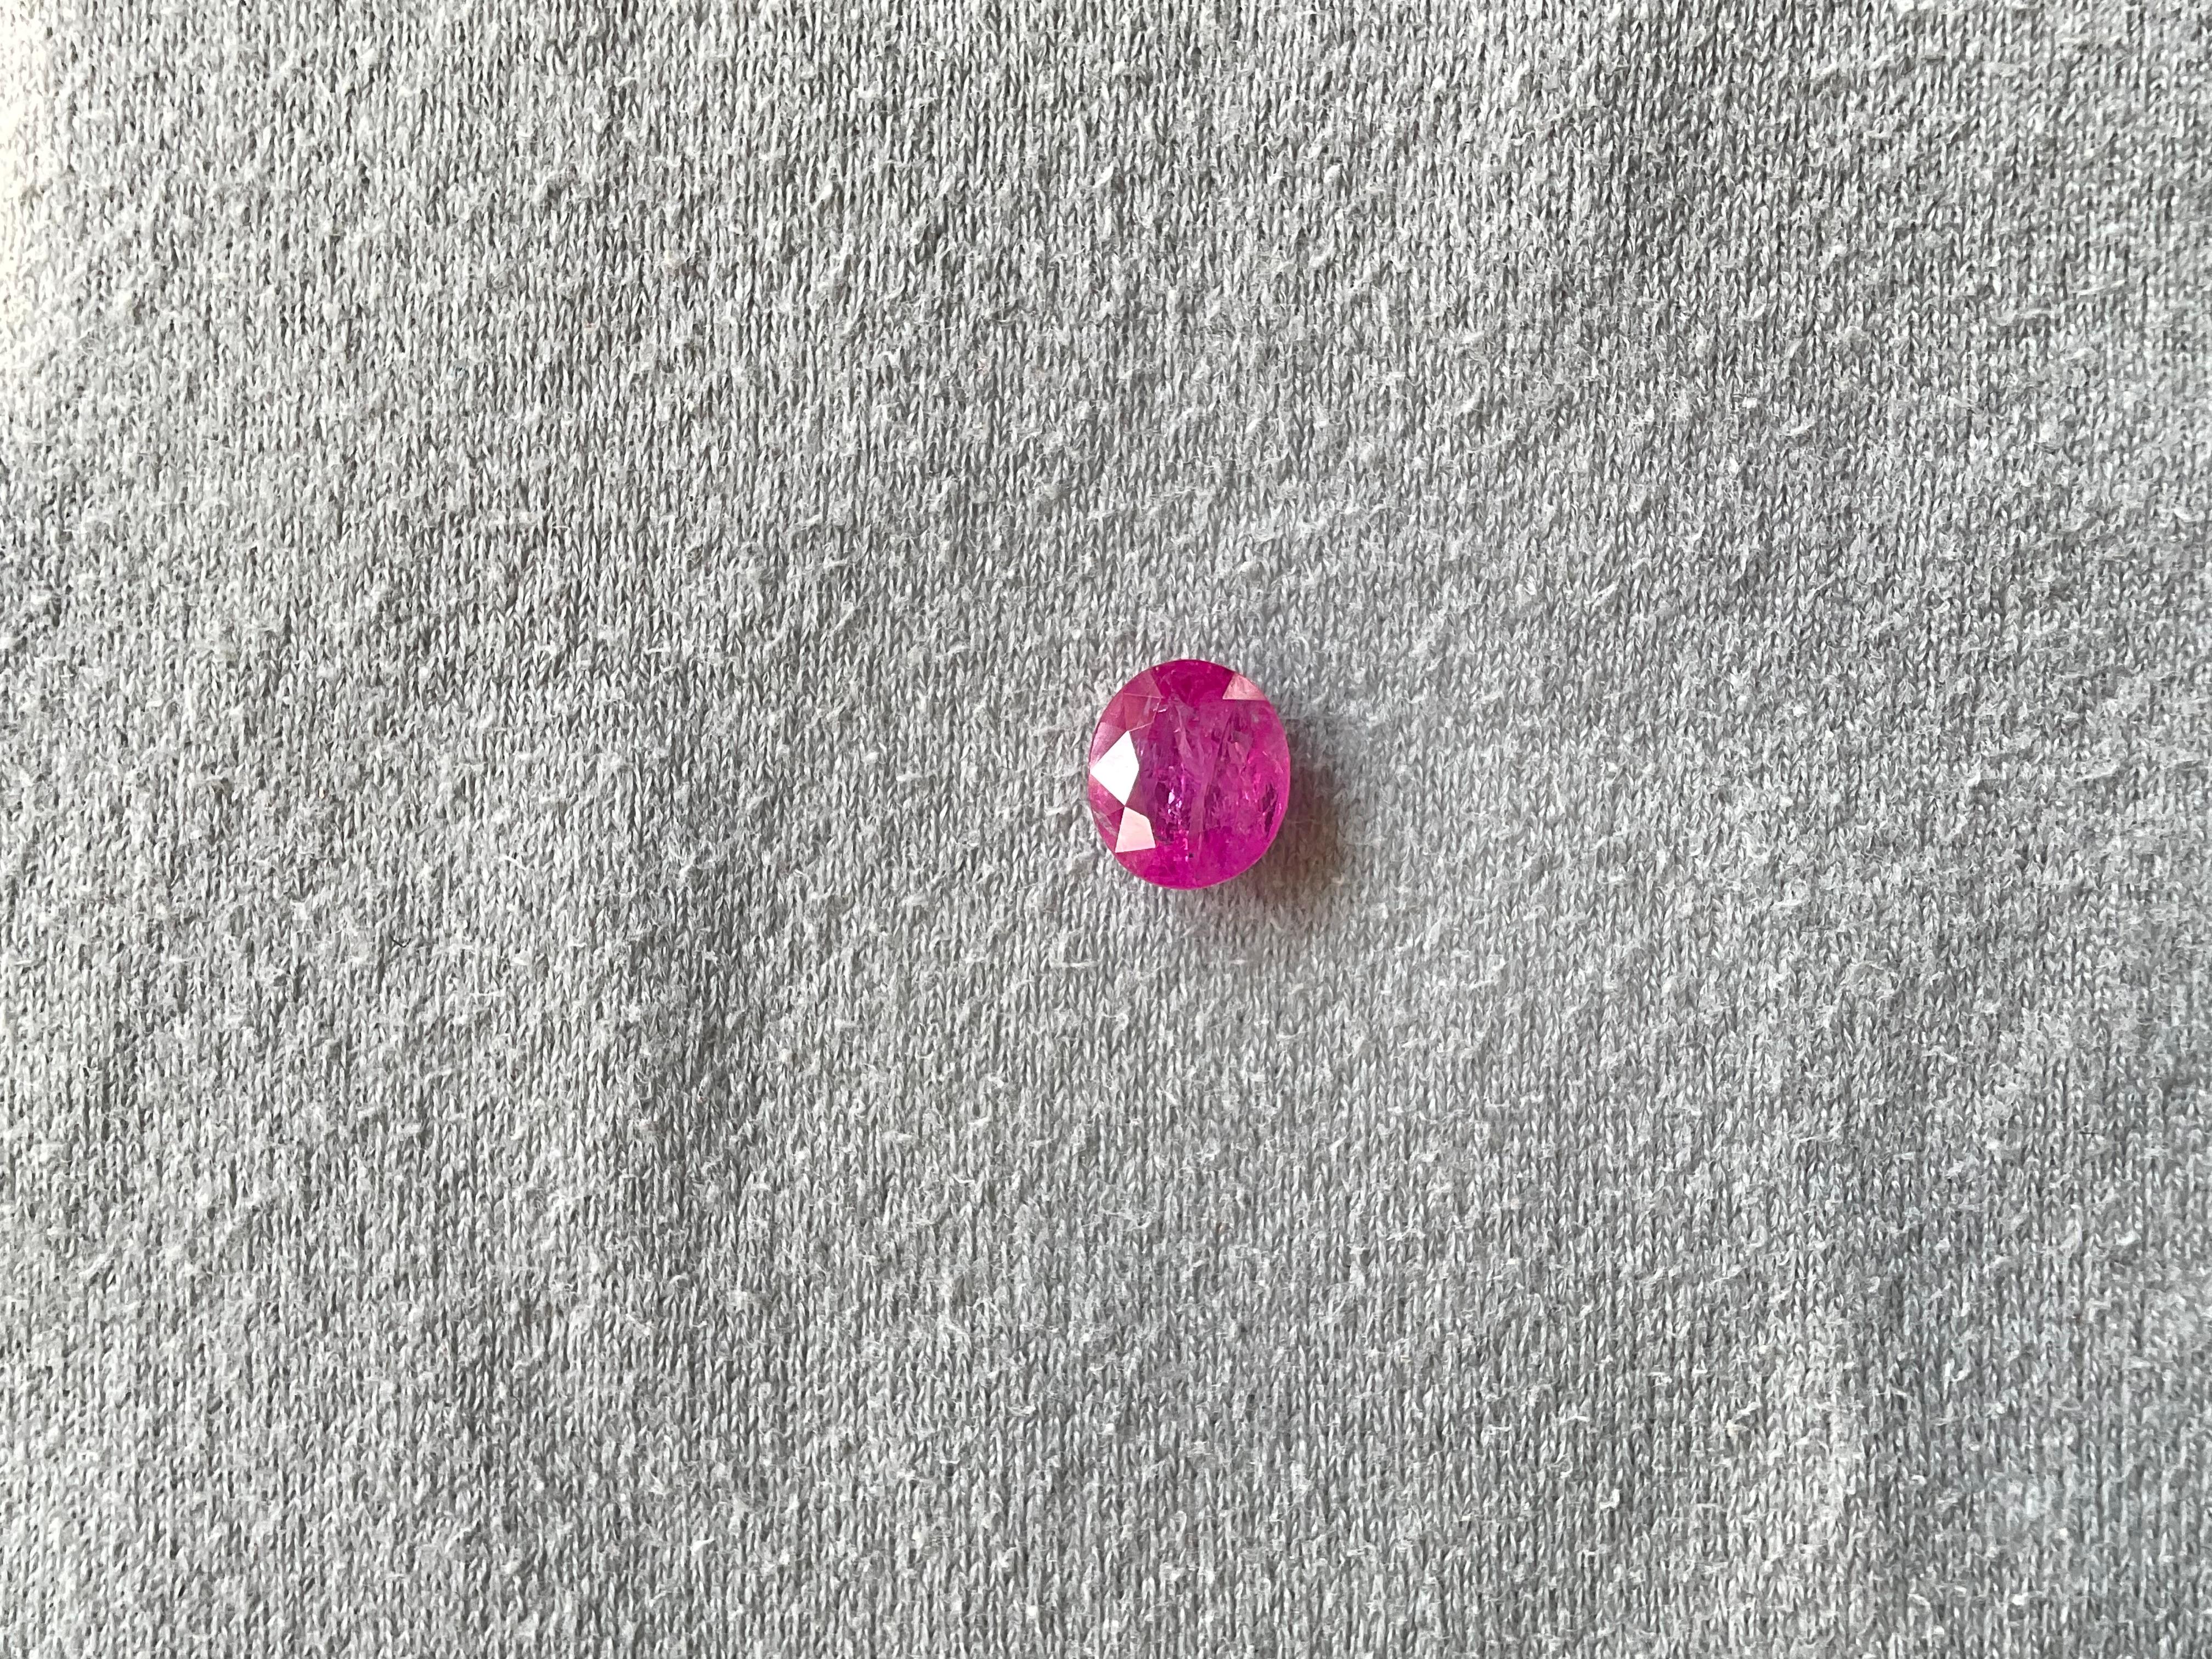 As we are auction partners at Gemfields, we have sourced these rubies from winning auctions and had cut them in our in house manufacturing responsibly.

Weight: 3.18 Carats
Size: 10x8.5x4 MM
Pieces: 1
Shape: Faceted Oval cut stone